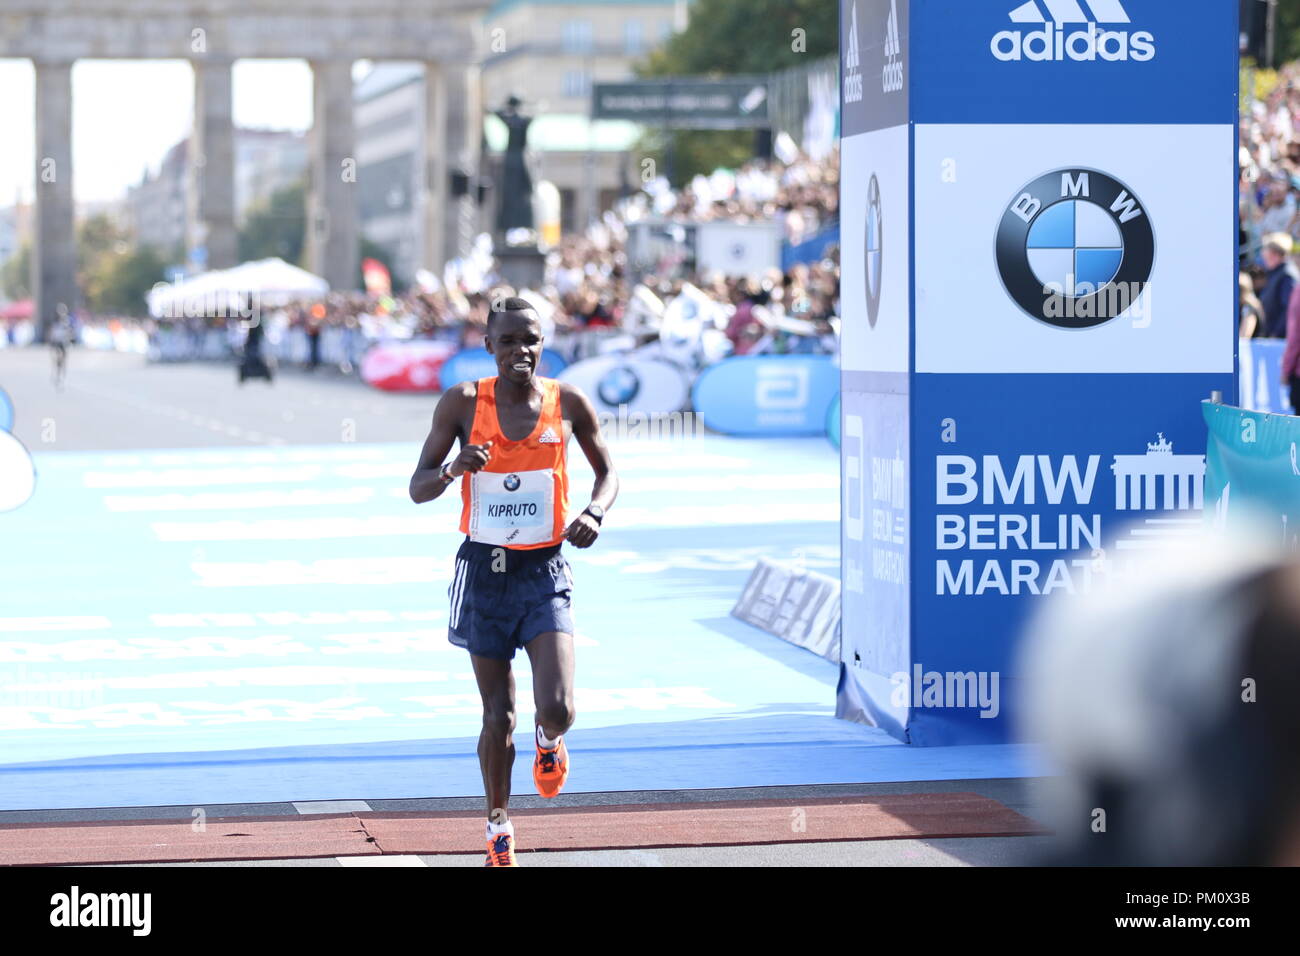 Berlin, Germany. 16 September 2018. Amos Kipruto after the finish line.  Eliud Kipchoge wins the BMW-Berlin Marathon in a new world record time.  With 2:01:39 hours Kipchoge wins the 45th BMW Berlin